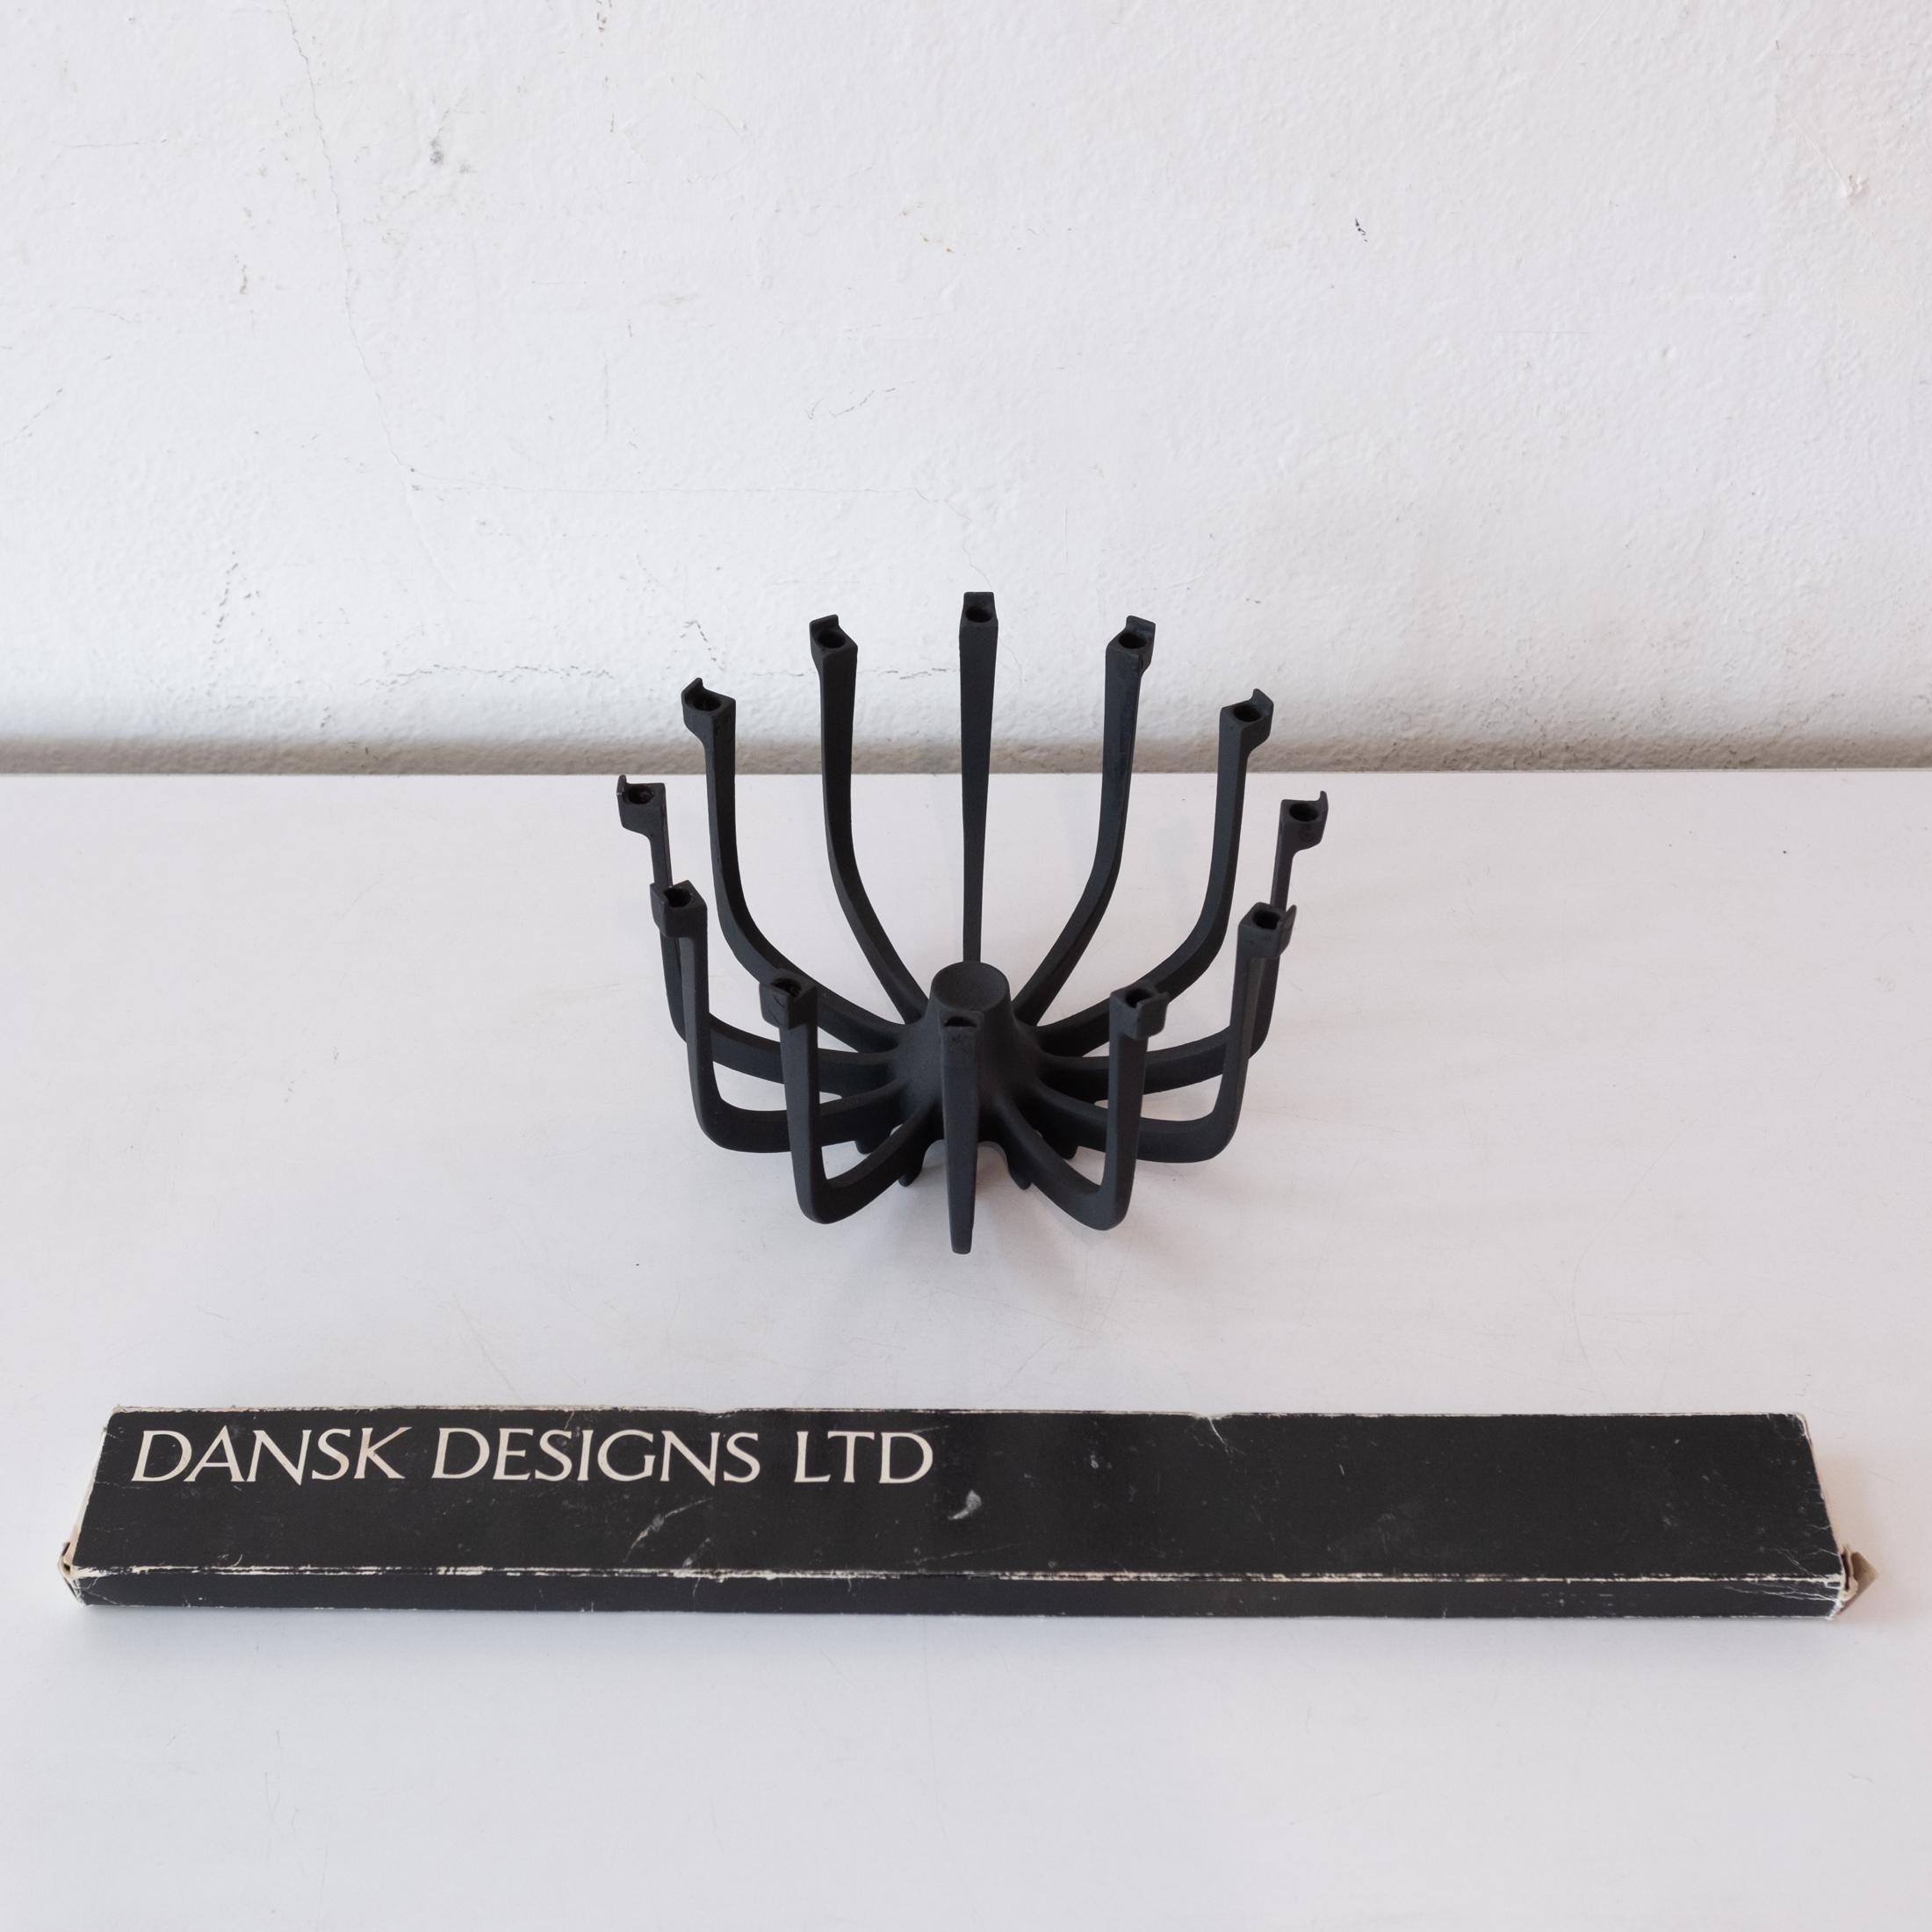 Gunnar Cyren designed iron candle holder by Dansk. Part of the Lysestager line. This is a rare form. Includes a box tapered Dansk candles.